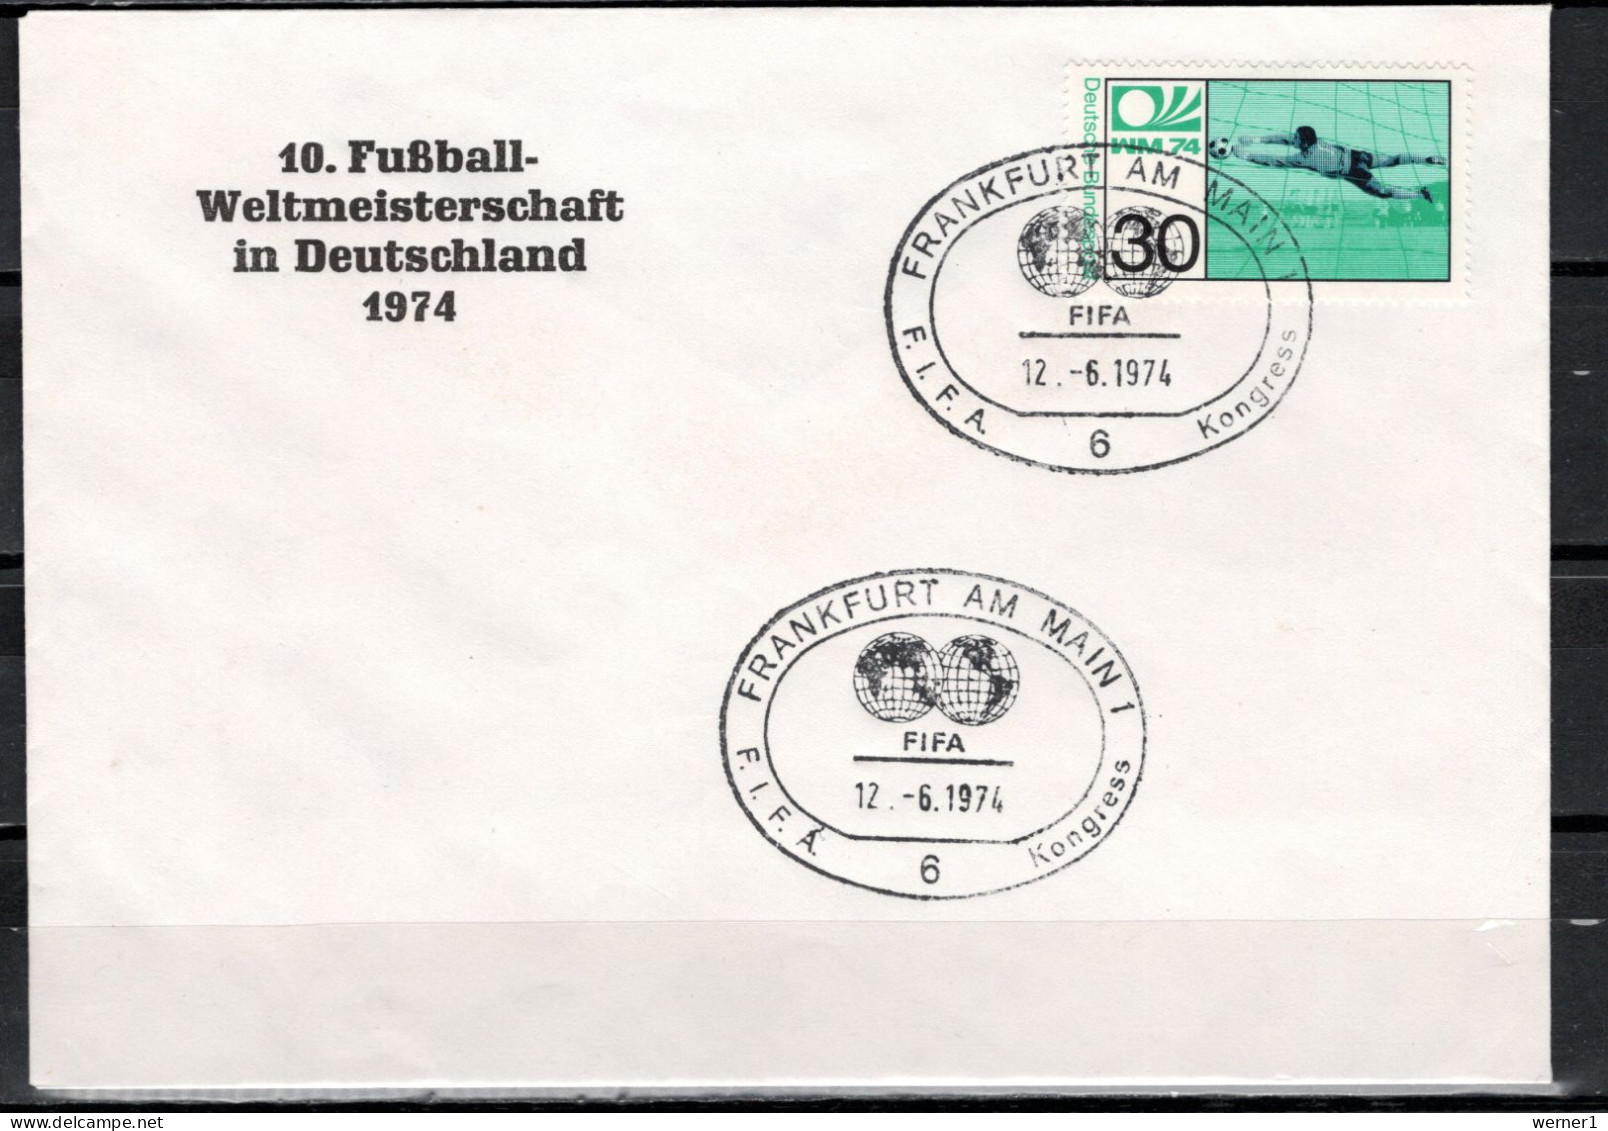 Germany 1974 Football Soccer World Cup Commemorative Cover - 1974 – West Germany